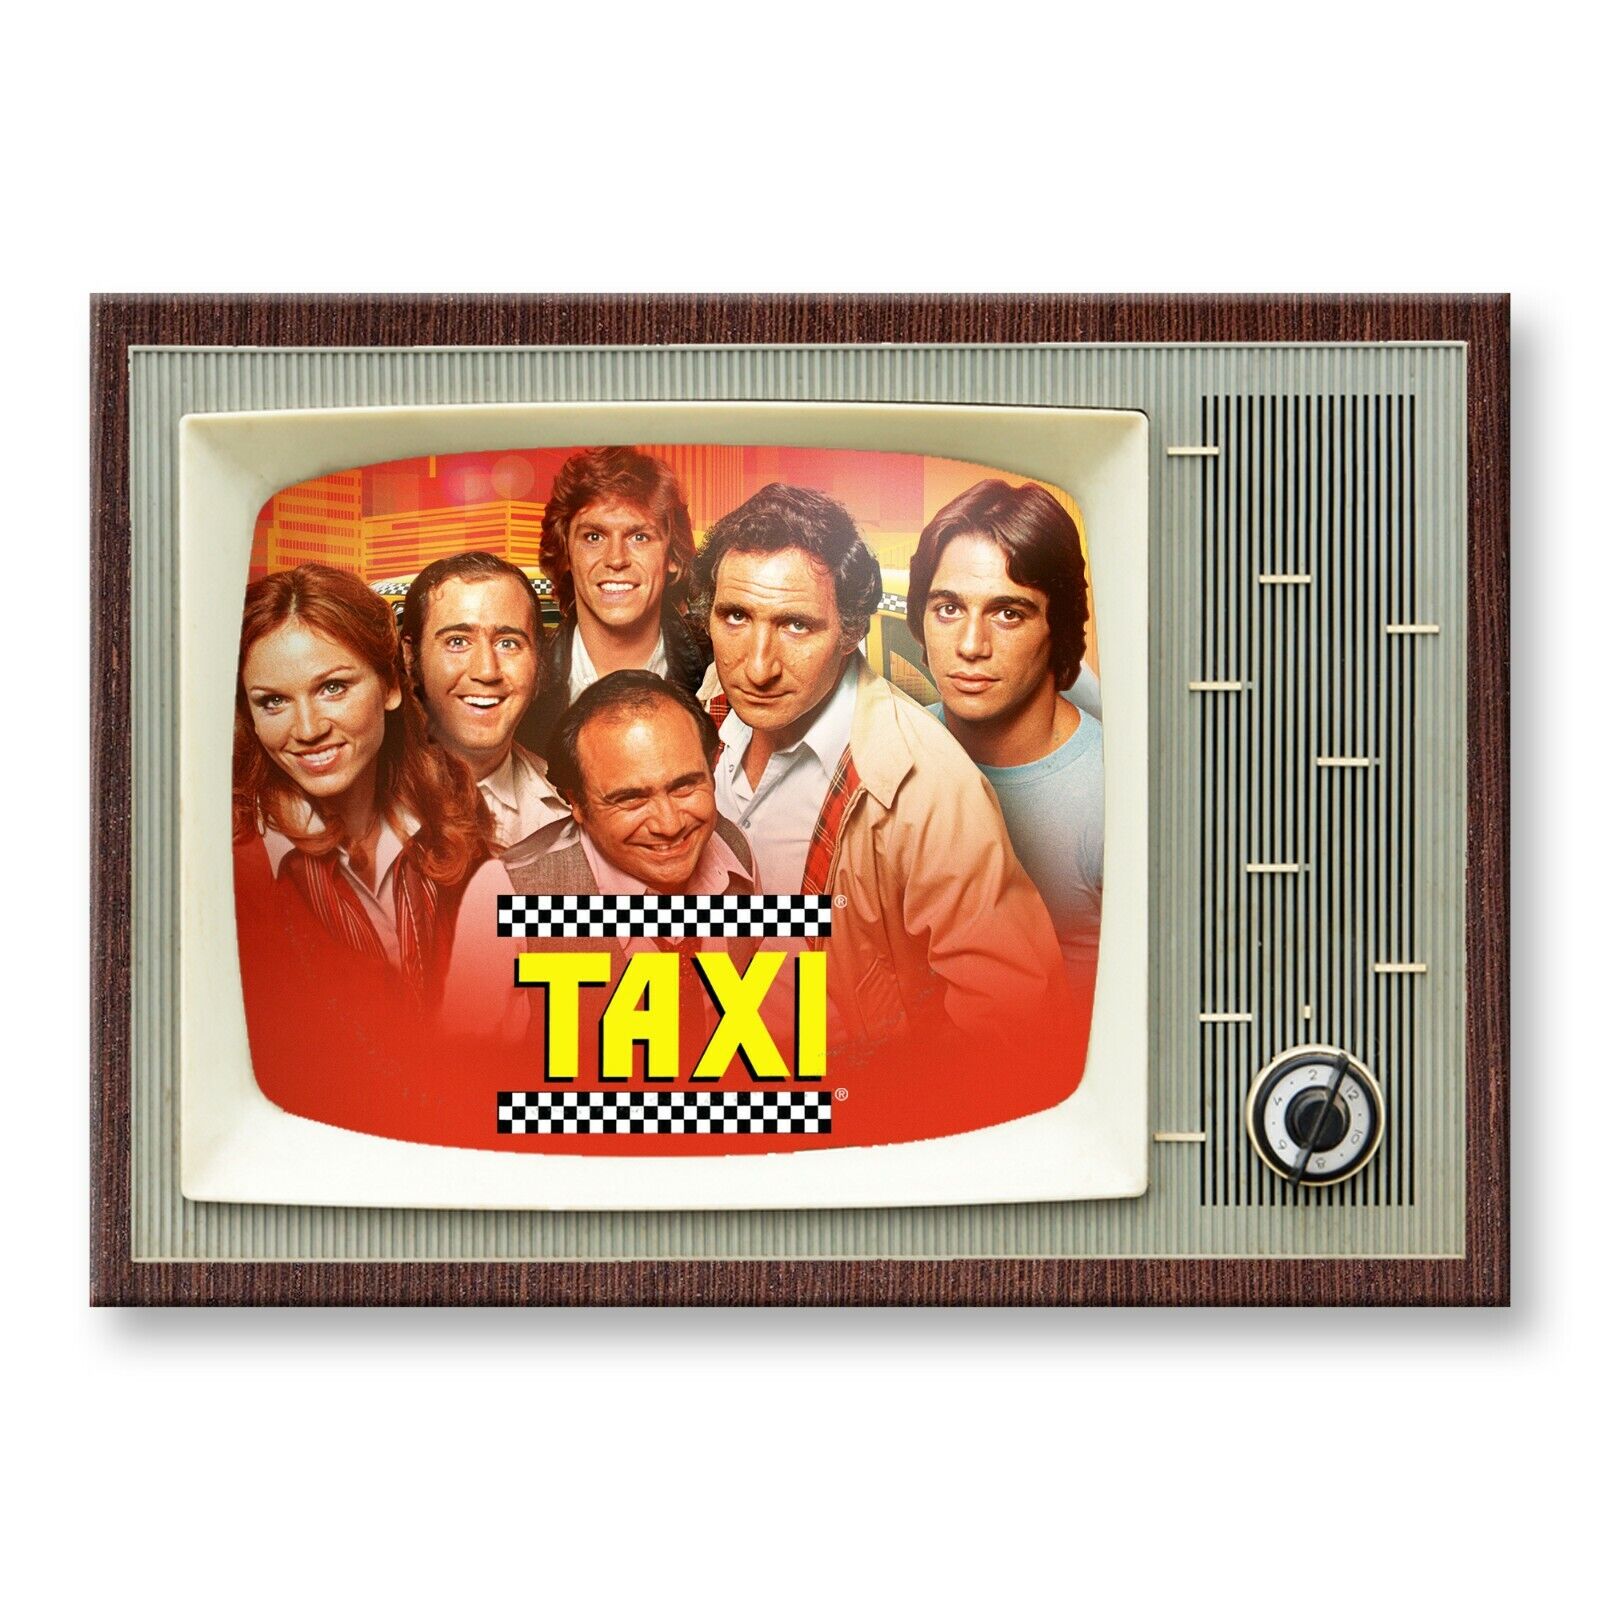 TAXI Classic TV Show 3.5 inches x 2.5 inches Steel FRIDGE MAGNET